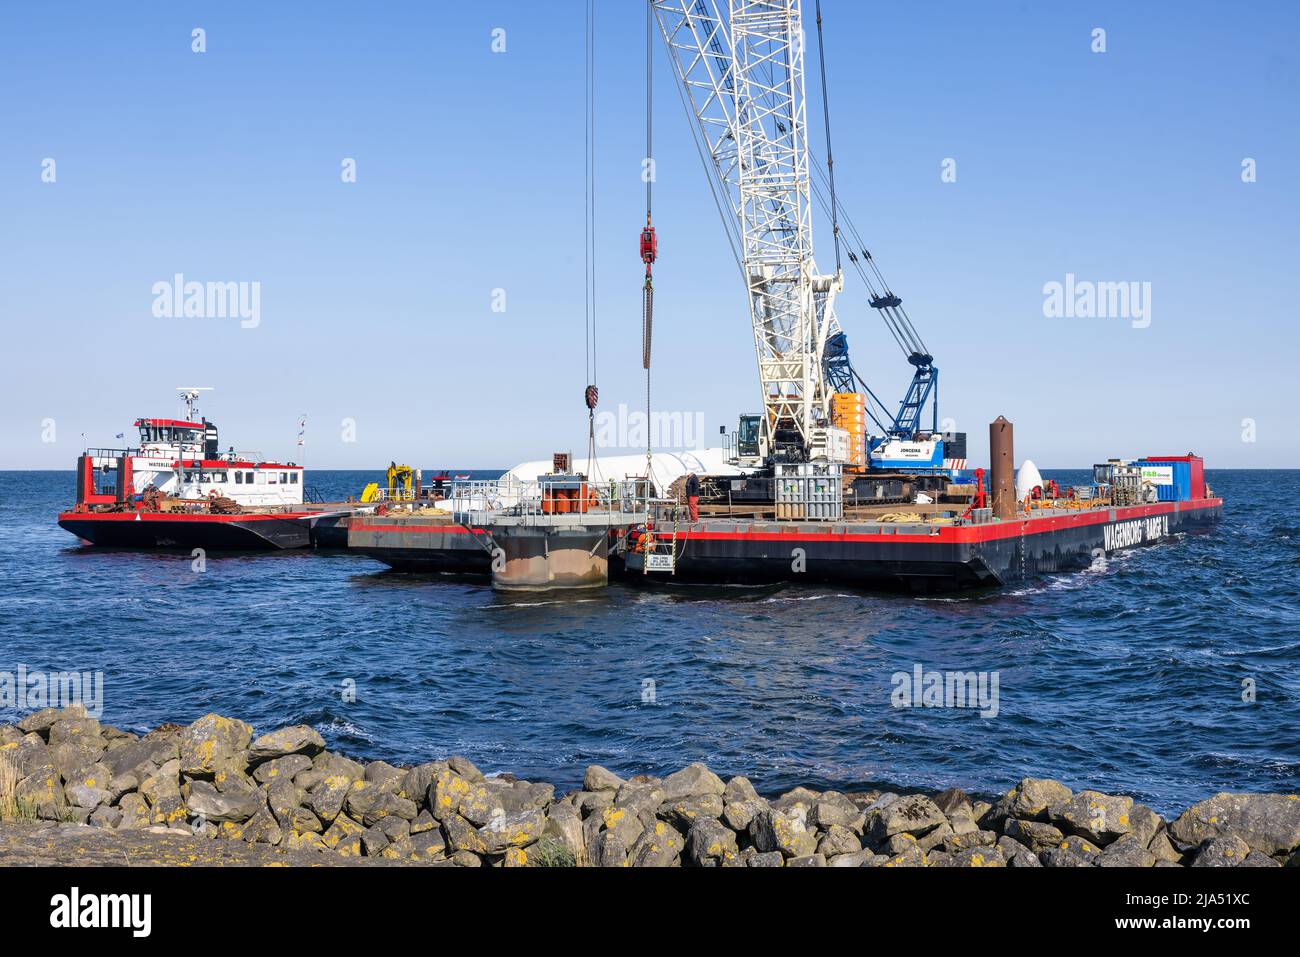 Lelystad, The Netherlands - April 22, 2022: Crane ship and supply vessel busy with demolition old offshore wind turbine Stock Photo